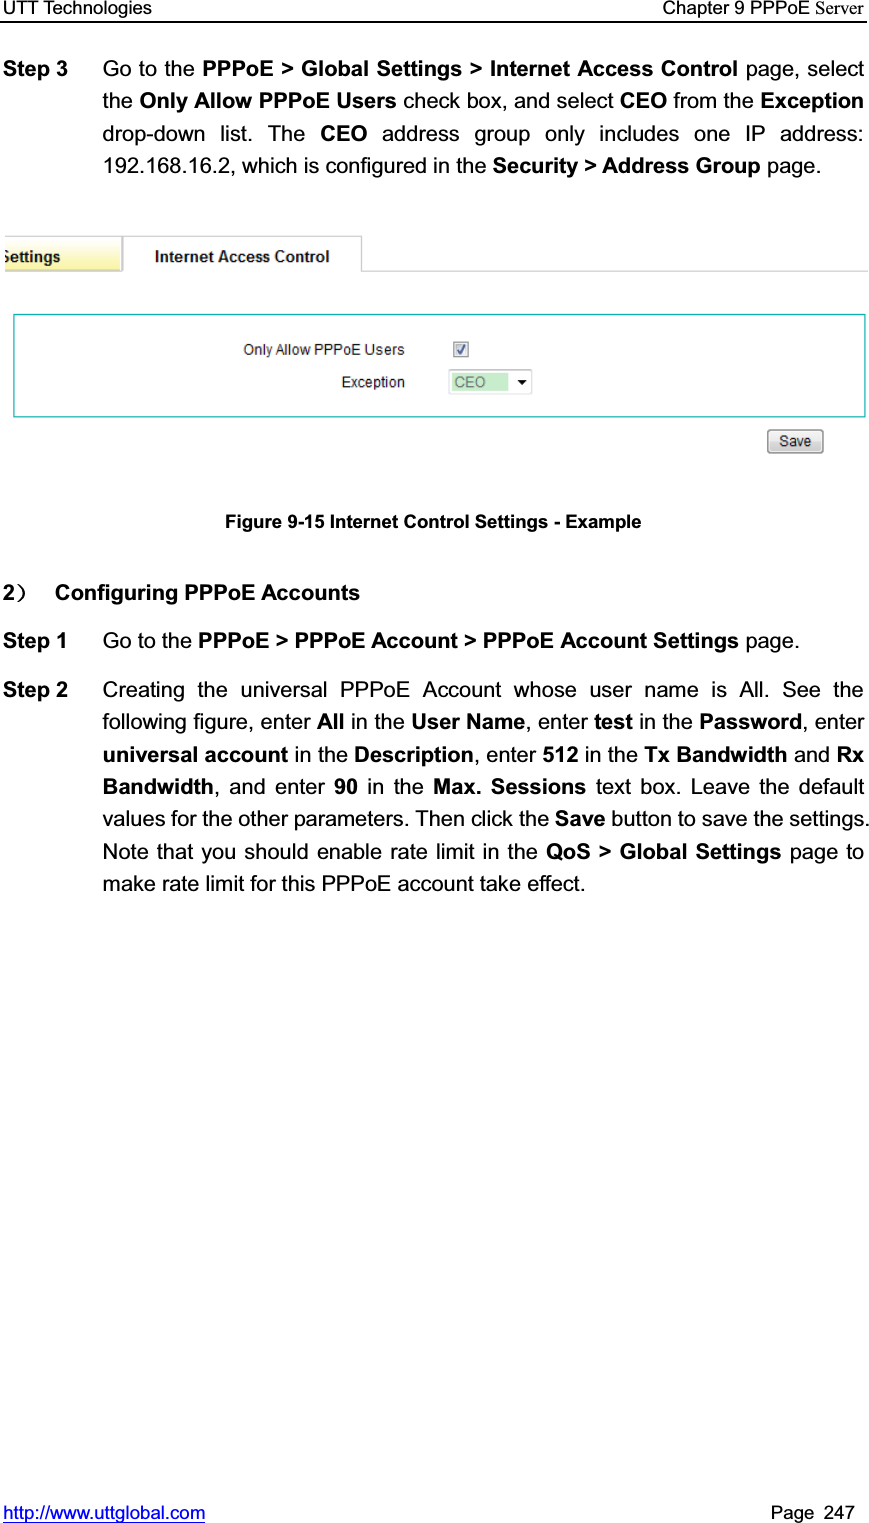 UTT Technologies    Chapter 9 PPPoE Serverhttp://www.uttglobal.com Page 247 Step 3  Go to the PPPoE &gt; Global Settings &gt; Internet Access Control page, select the Only Allow PPPoE Users check box, and select CEO from the Exceptiondrop-down list. The CEO address group only includes one IP address: 192.168.16.2, which is configured in the Security &gt; Address Group page. Figure 9-15 Internet Control Settings - Example 2˅ Configuring PPPoE Accounts Step 1  Go to the PPPoE &gt; PPPoE Account &gt; PPPoE Account Settings page. Step 2  Creating the universal PPPoE Account whose user name is All. See the following figure, enter All in the User Name, enter test in the Password, enter universal account in the Description, enter 512 in the Tx Bandwidth and RxBandwidth, and enter 90 in the Max. Sessions text box. Leave the default values for the other parameters. Then click the Save button to save the settings. Note that you should enable rate limit in the QoS &gt; Global Settings page to make rate limit for this PPPoE account take effect. 